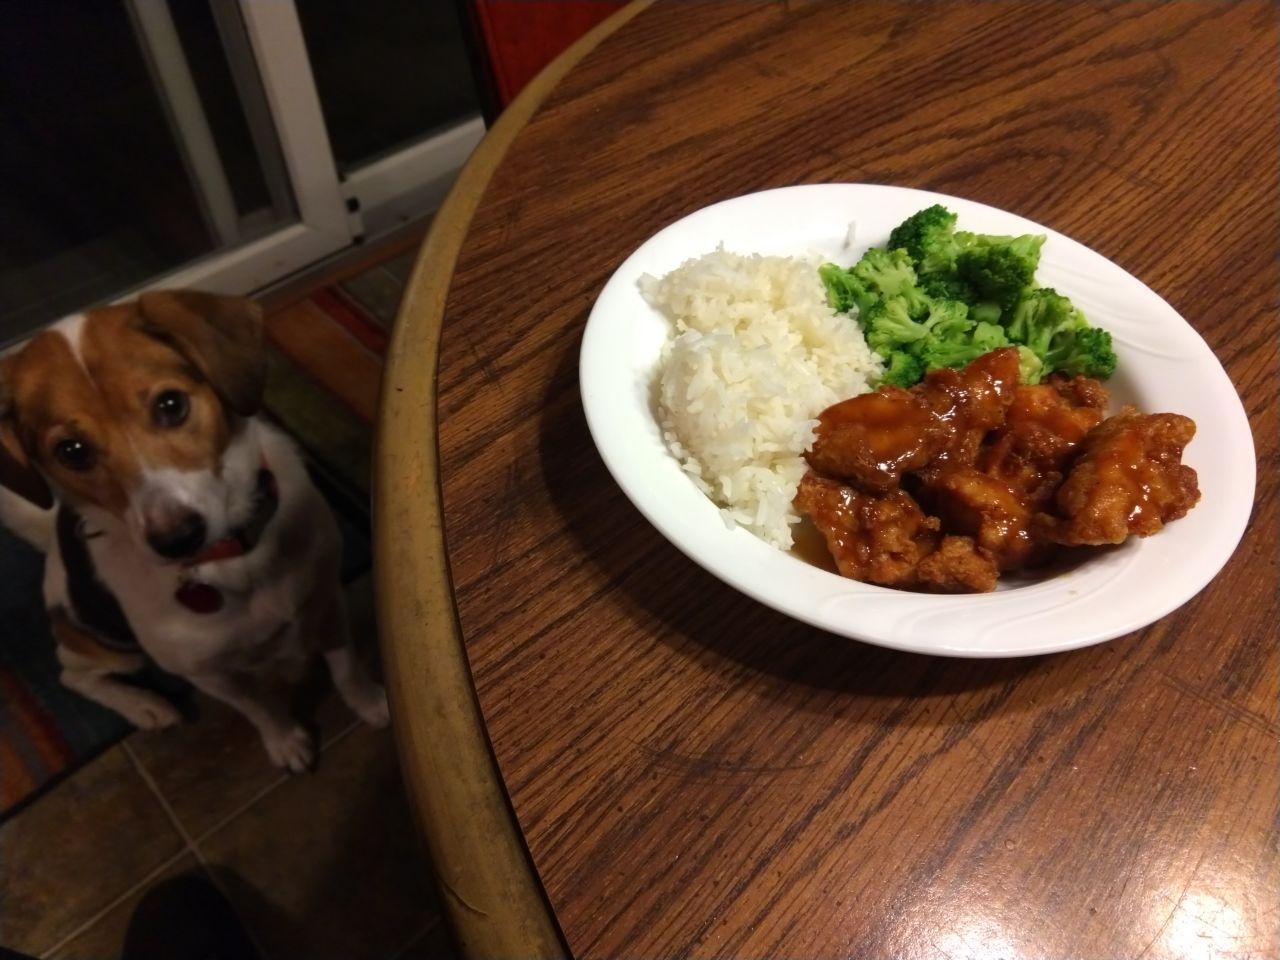 Peanut butter chicken with rice and broccoli.